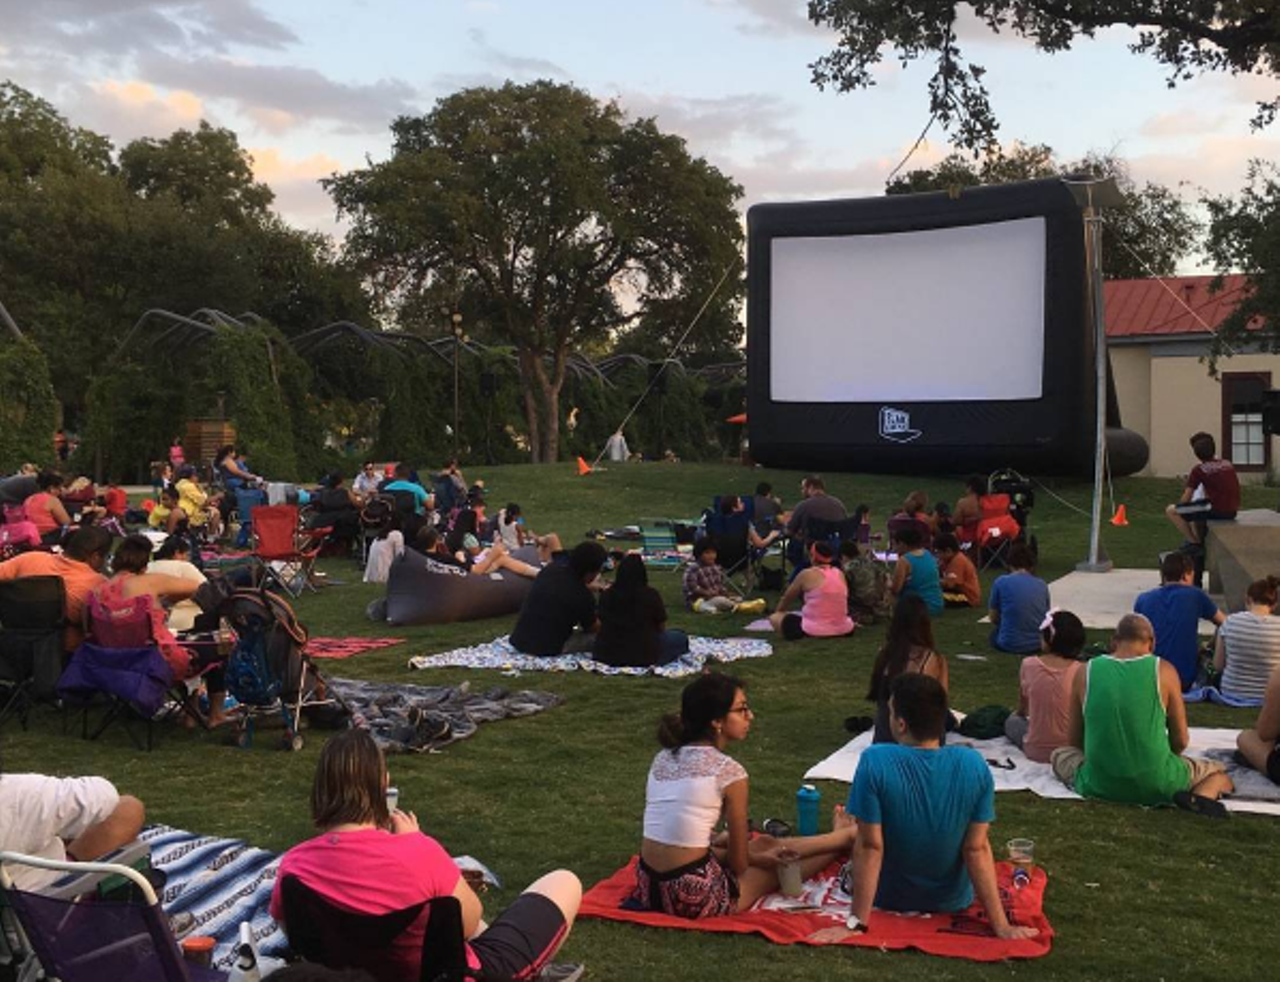 Check out what Slab Cinema is playing
Slab Cinema creates a whole different movie-viewing experience by taking the big screen outdoors. With multiple movie screenings a month, sit back, relax and enjoy a night out with your date.
Photo via Instagram, slabcinema